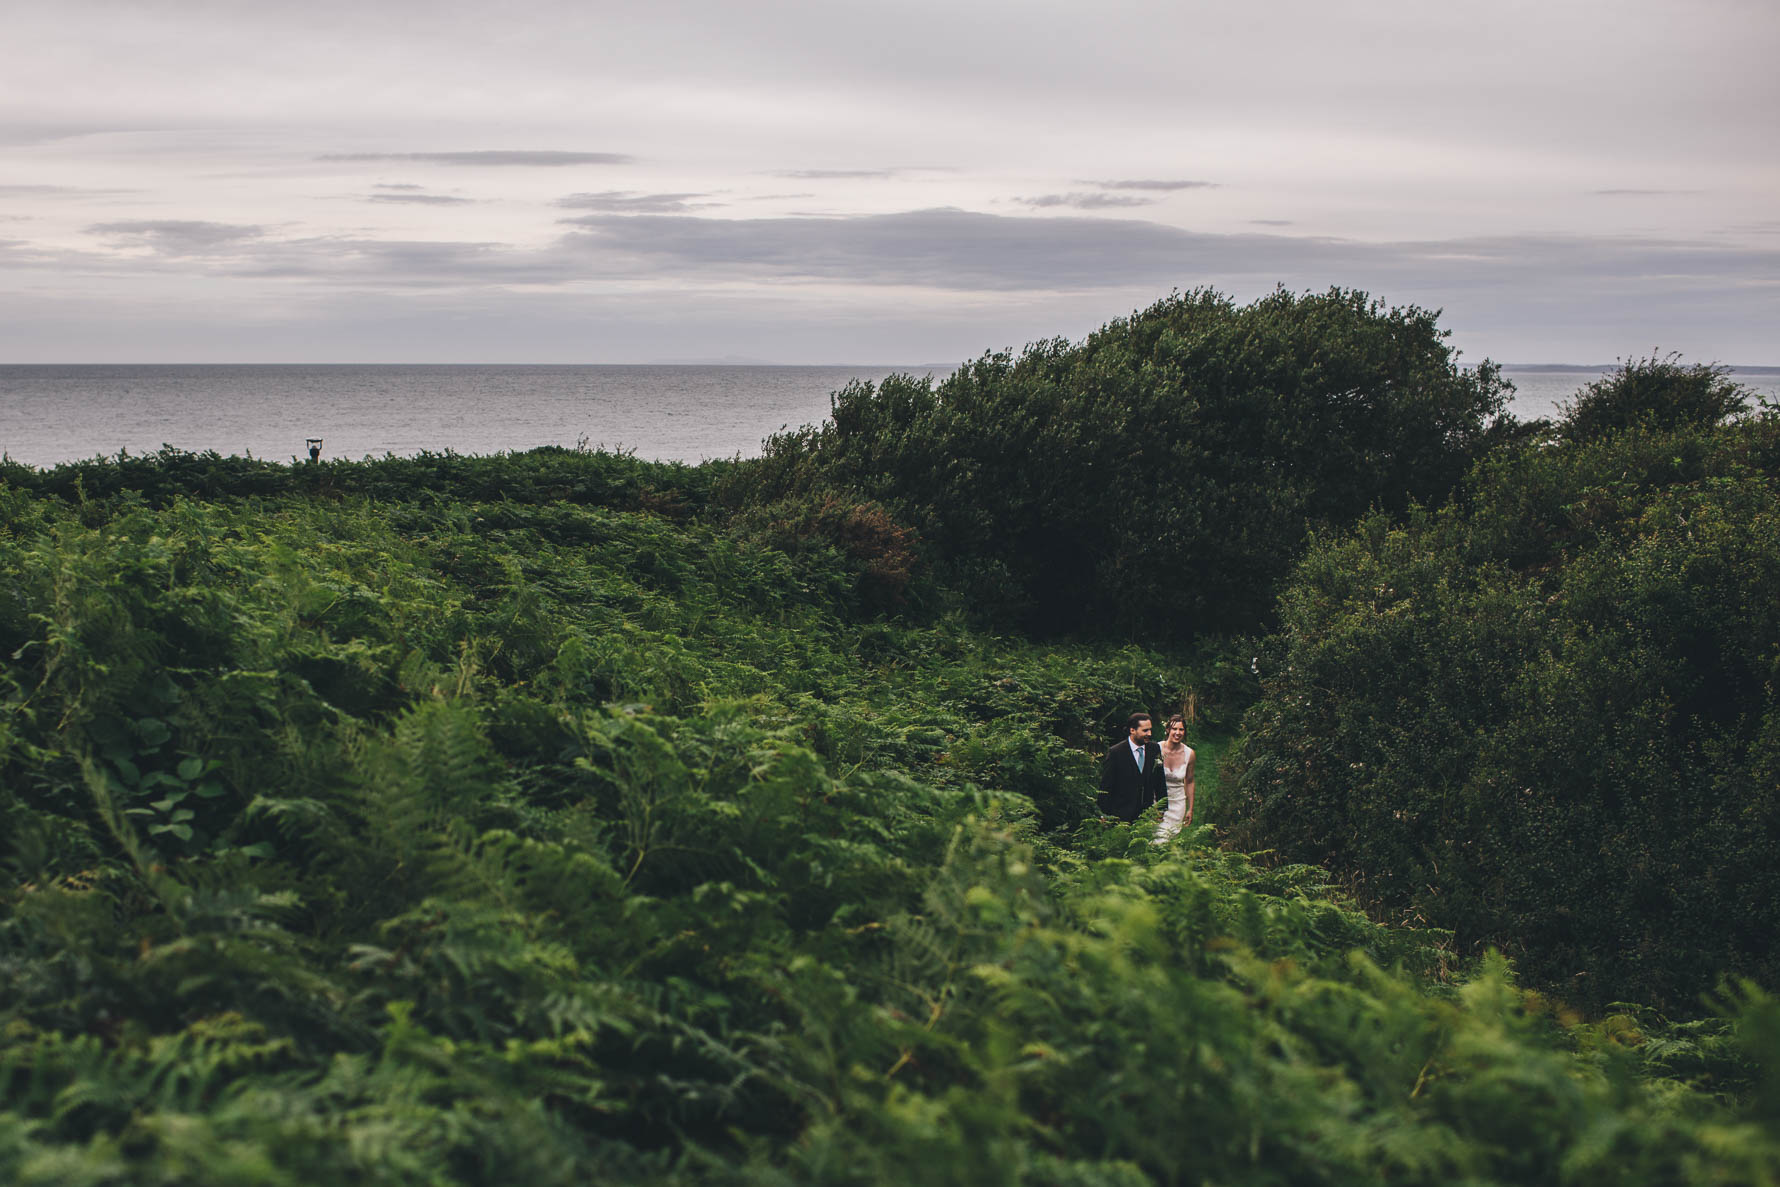 Bride and groom walking along a path amongst lots of tall ferns and trees by the sea